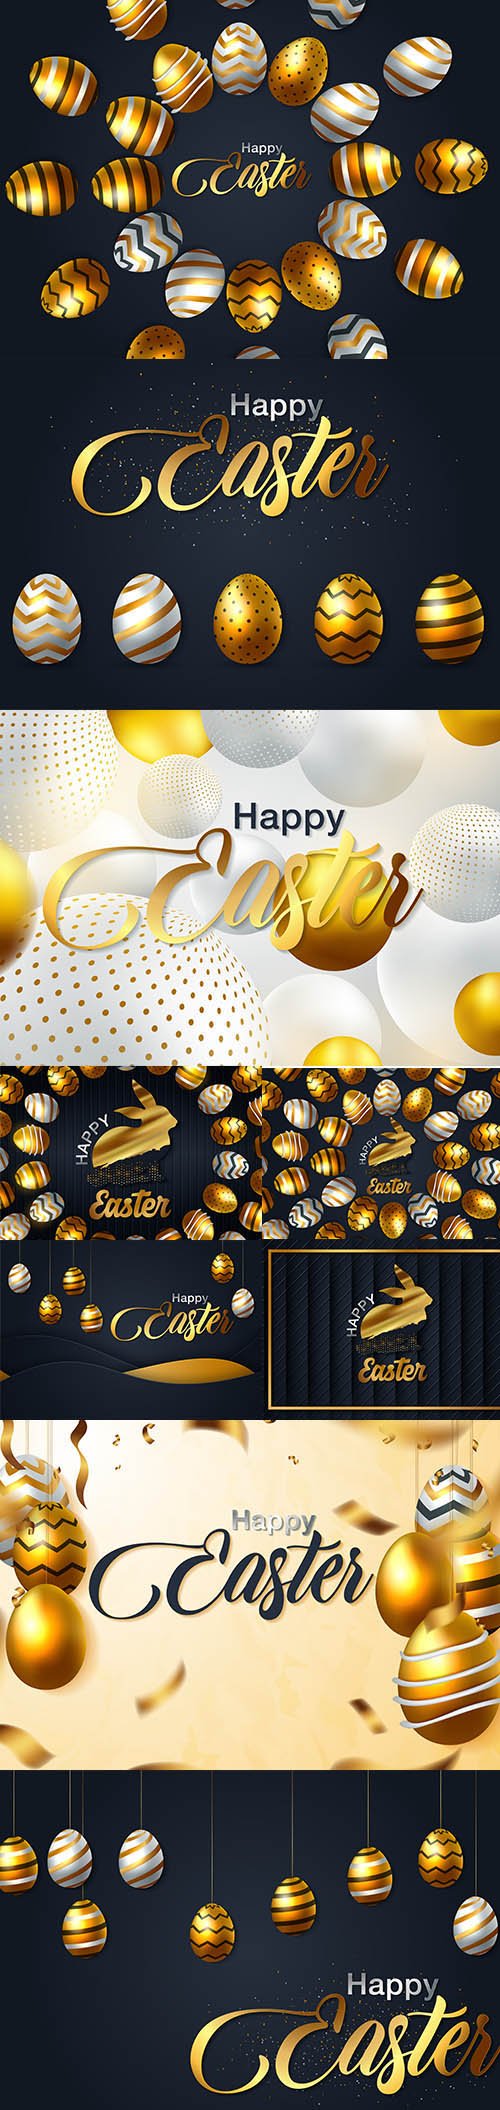 Happy Easter Luxury Backgrounds Template Vector Set